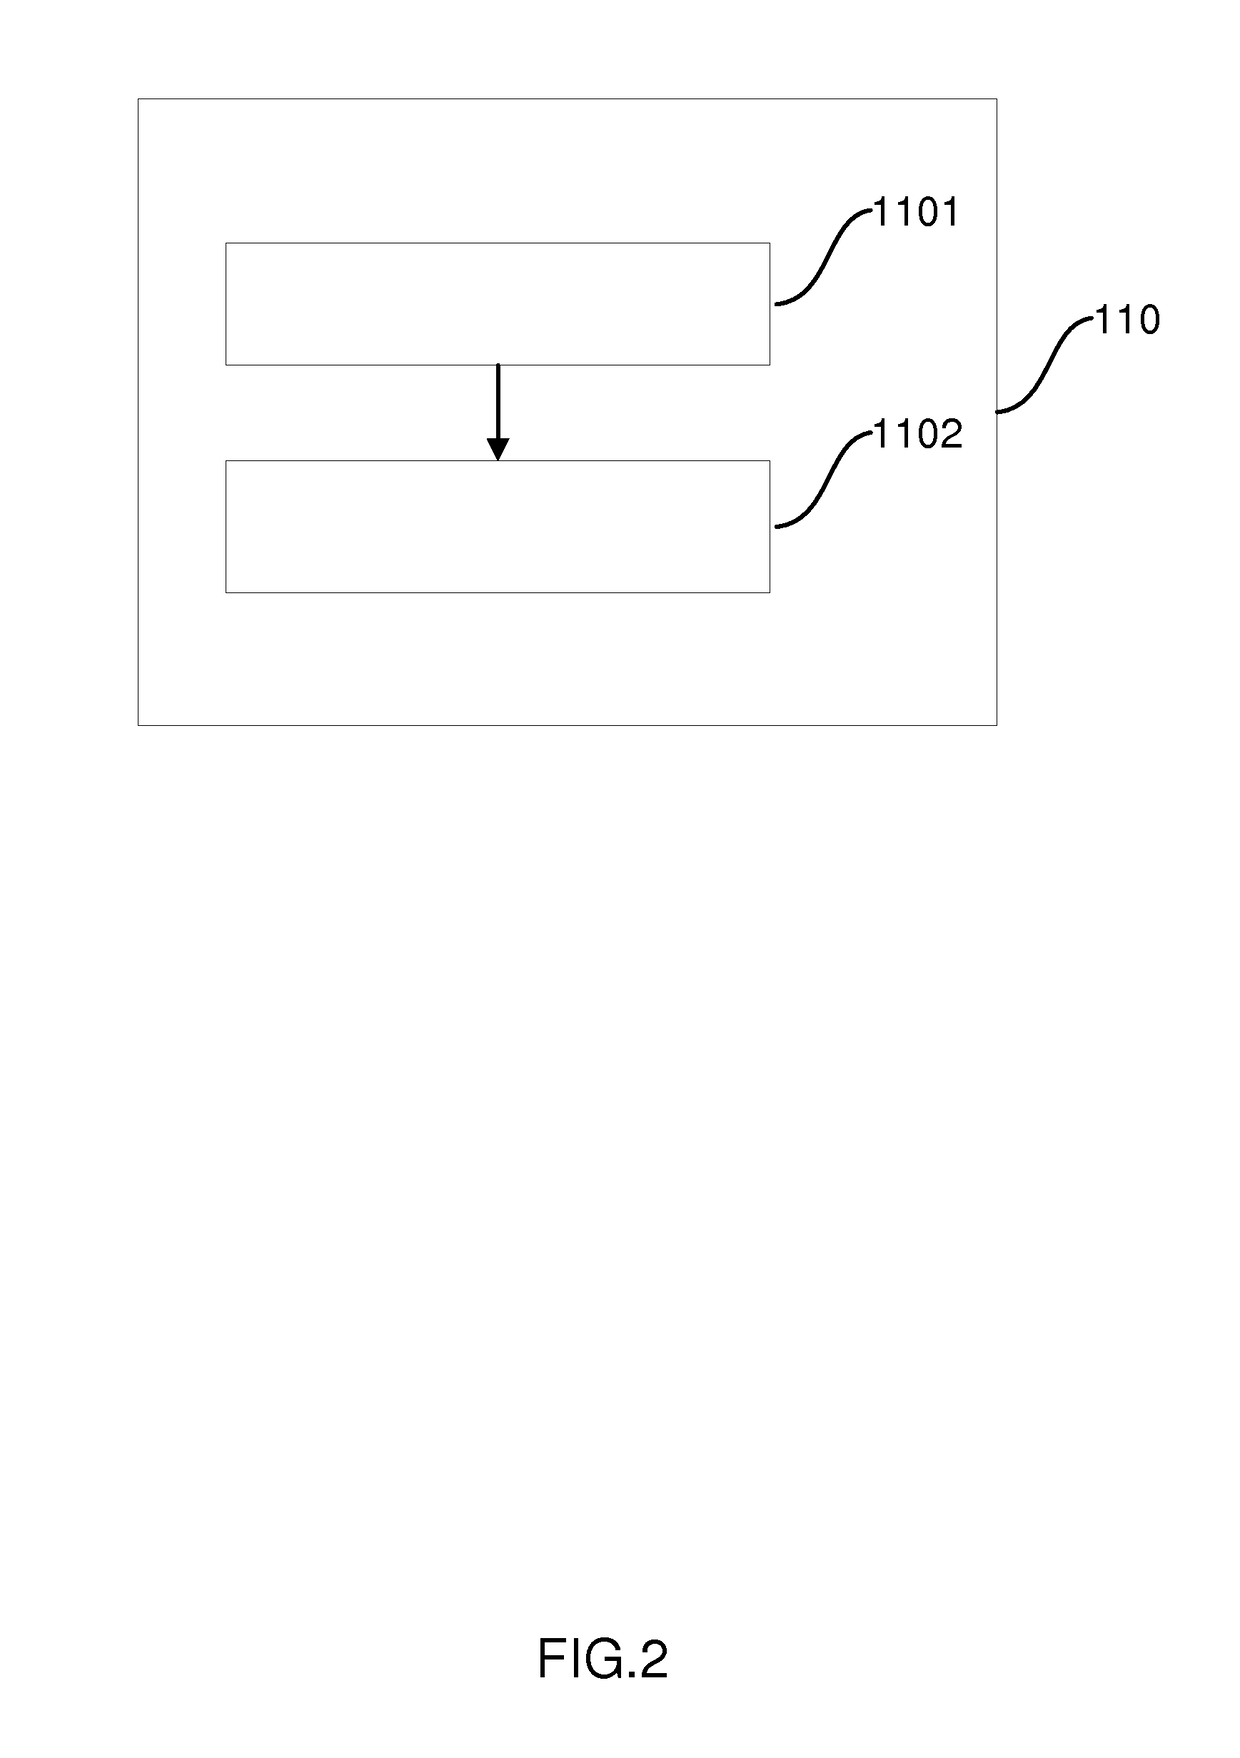 Method and apparatus for controlling the heating of food ingredients